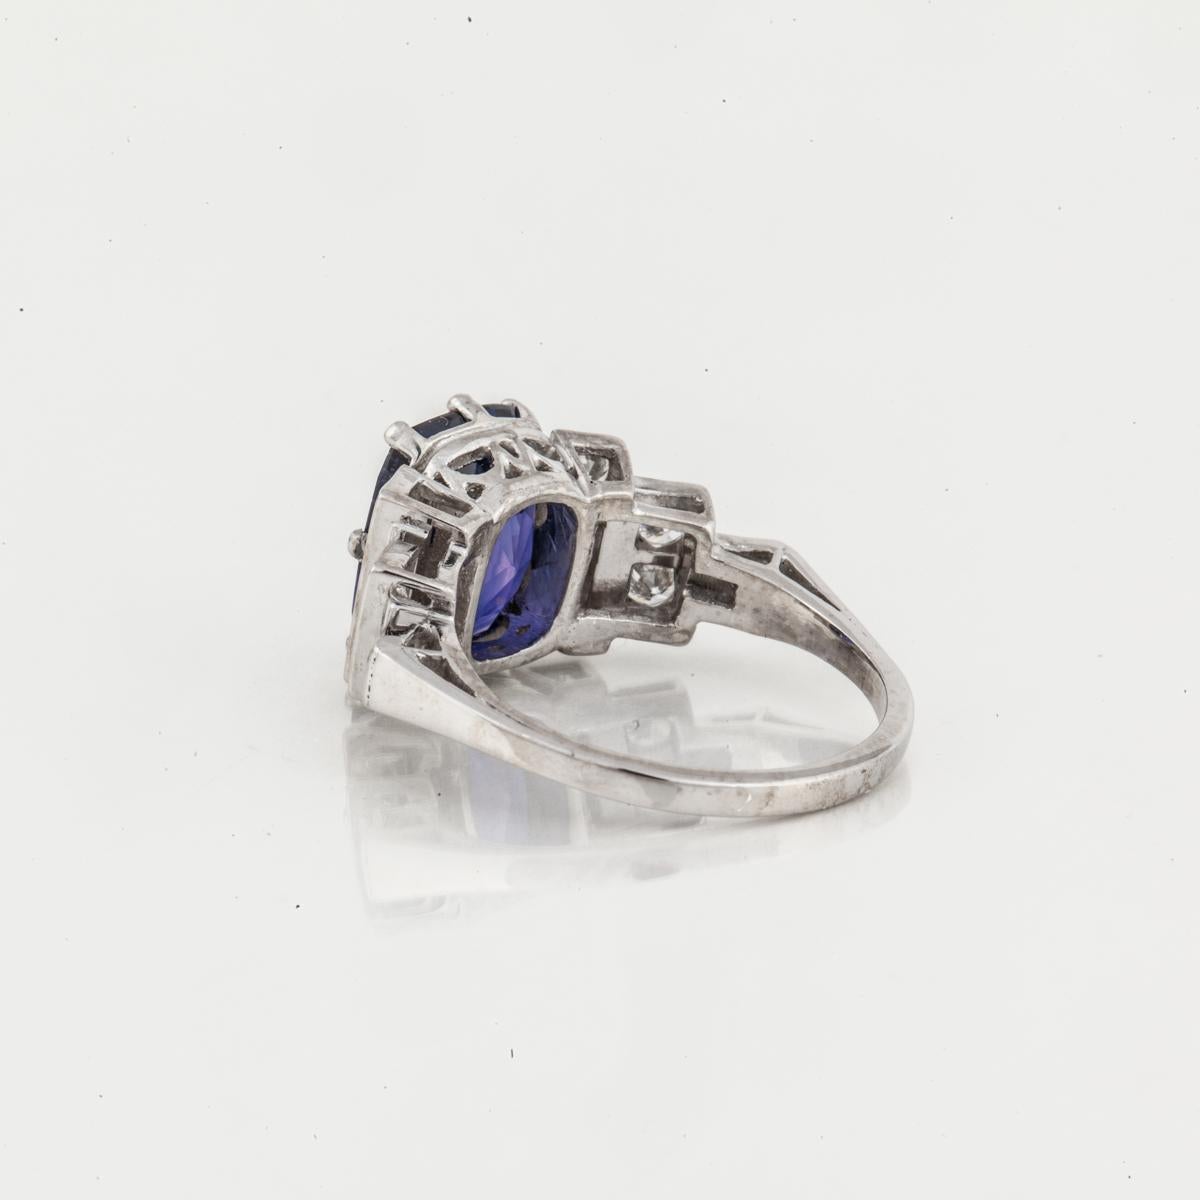 Platinum ring featuring a cushion-cut color changing sapphire accented by diamonds.  The sapphire is a blue/purple Ceylon stone weighing 4.13, natural and unheated, accompanied by an AGL certificate.  There are 12 round diamonds totaling 1 carat;